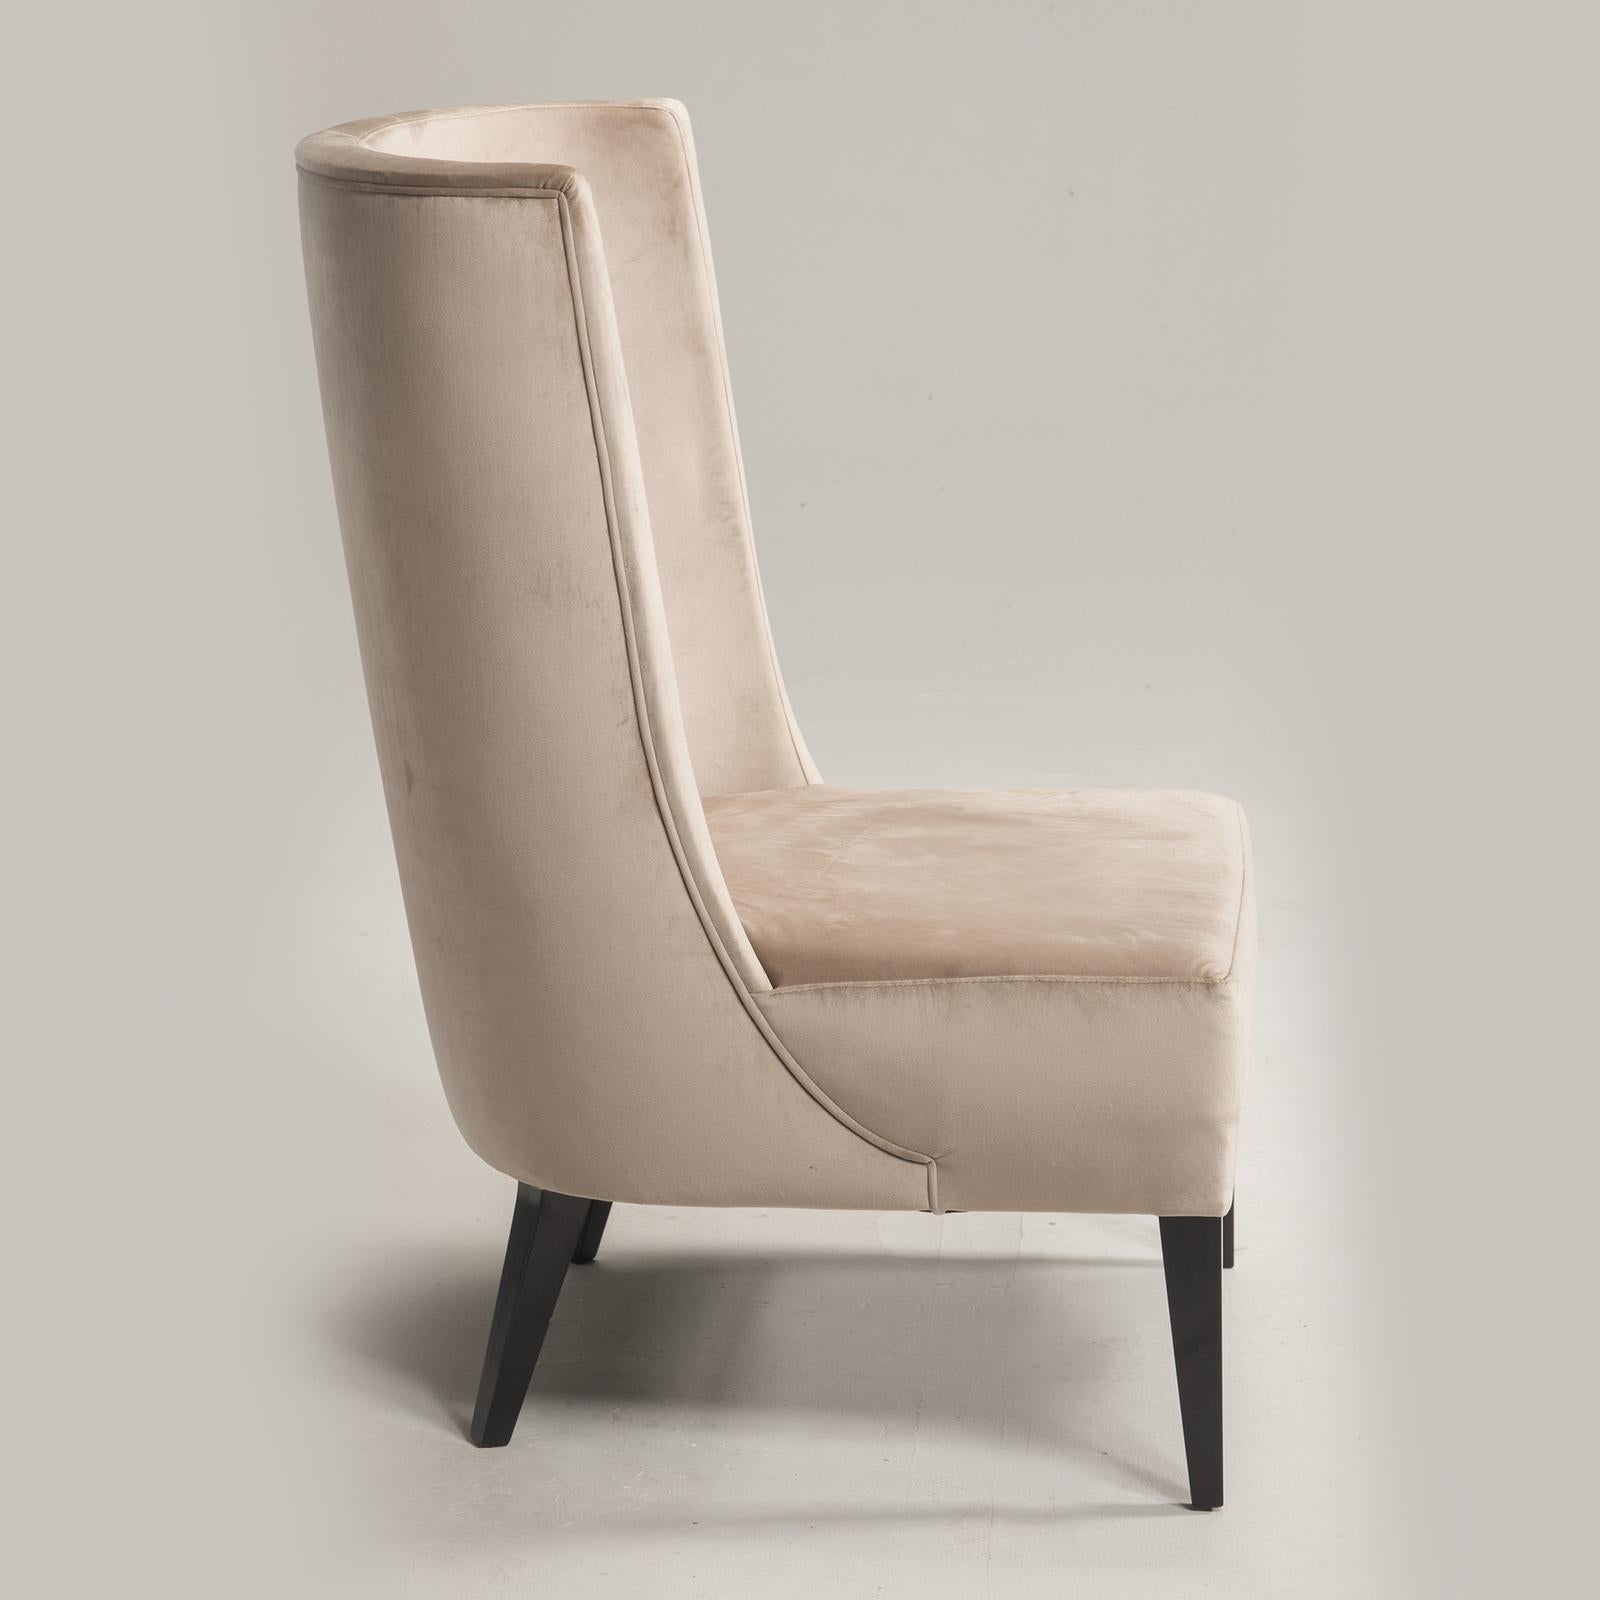 This elegant armchair boasts a sleek silhouette, defined by a curved back and no armrests. Upholstered in luxuriously soft velvety fabric, its understated yet refined design is supported by four tapered feet. With its versatile beige tone, the